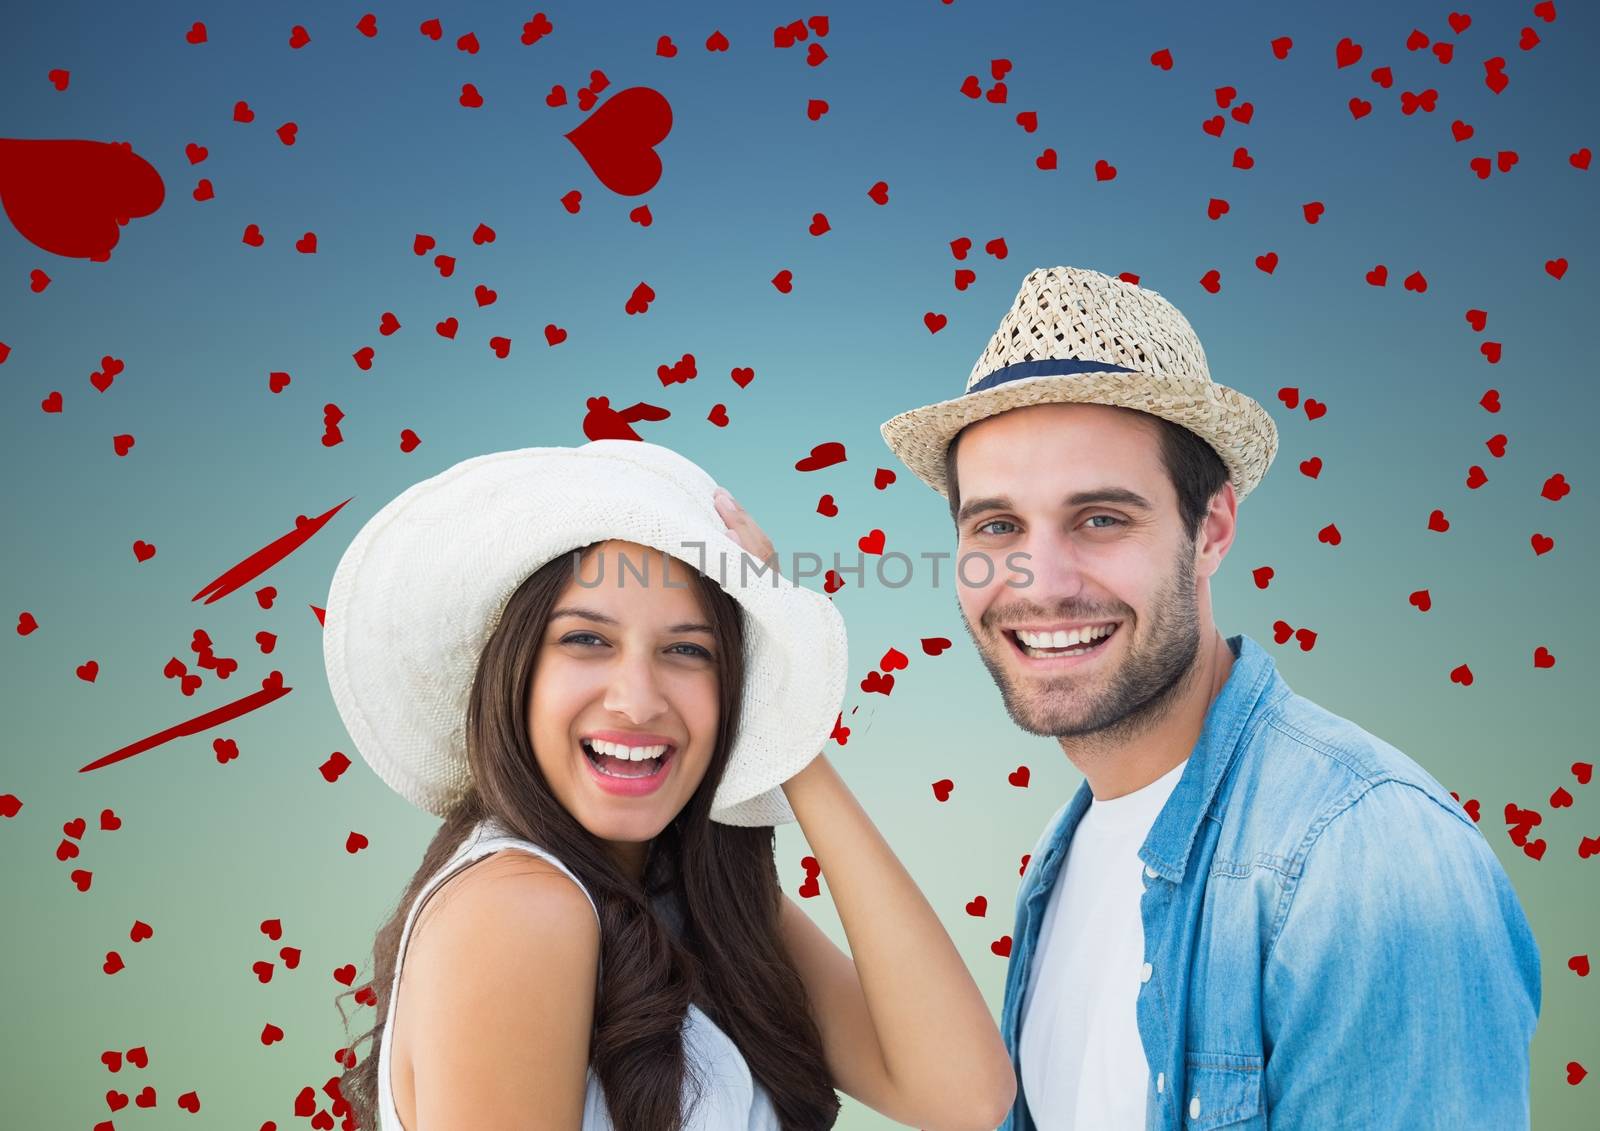 Romantic couple having fun against blue background with hearts